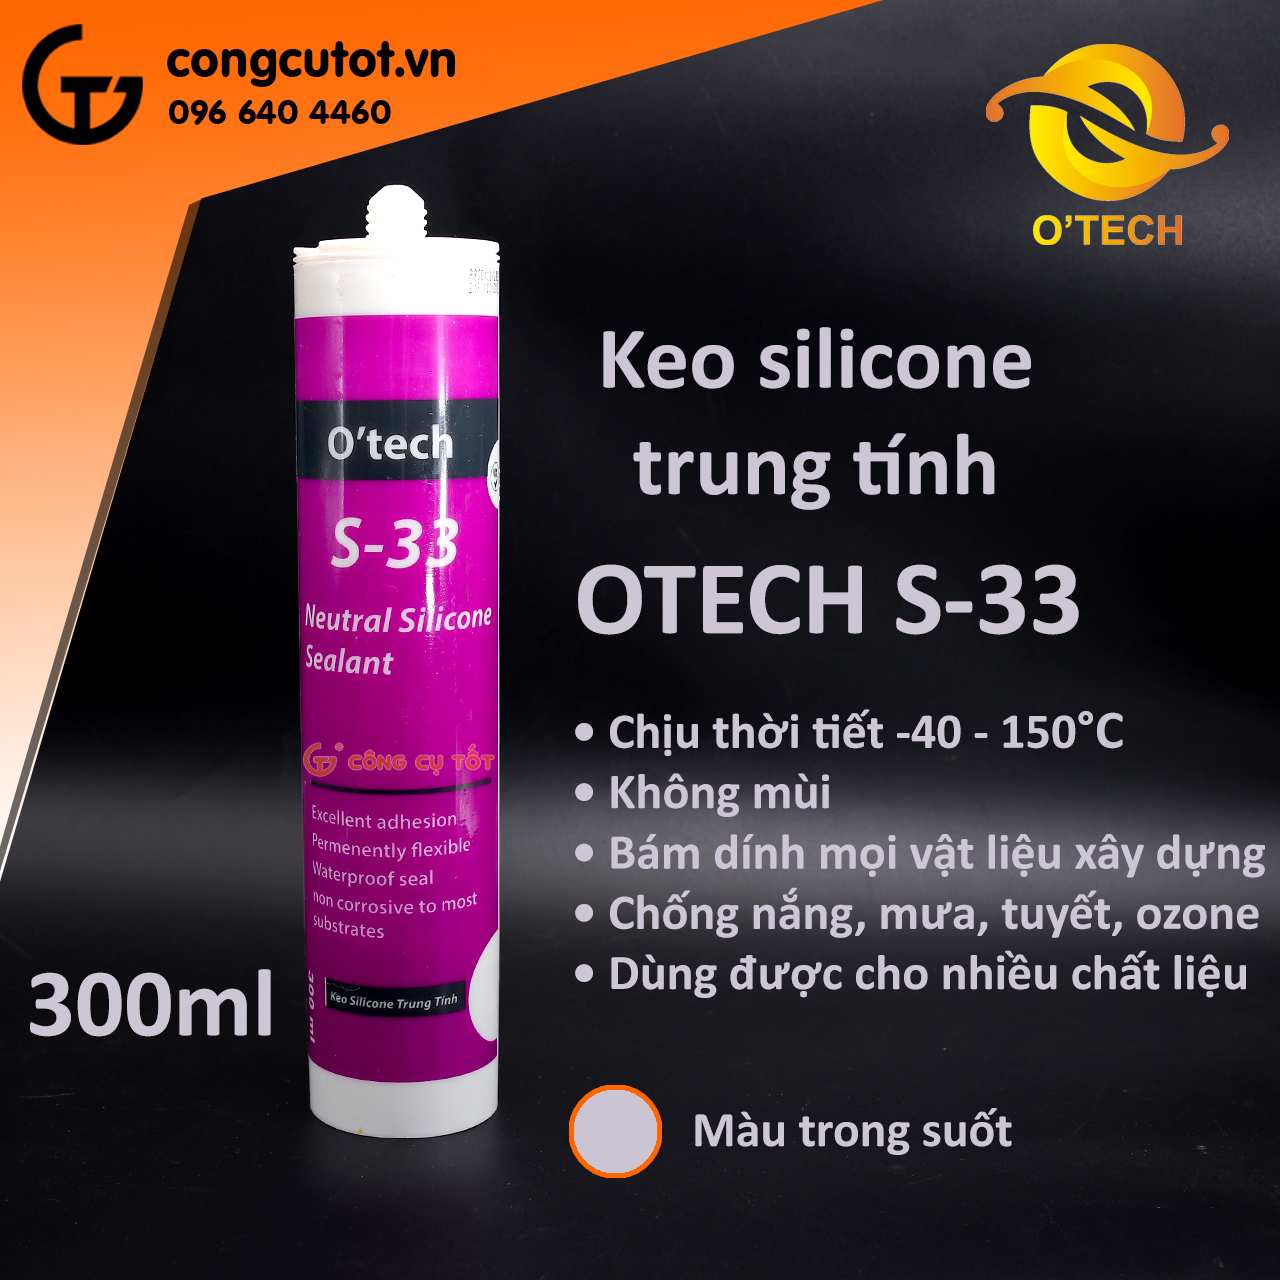 Keo silicone trung tính 300ml OTECH S-33 trong suốt.